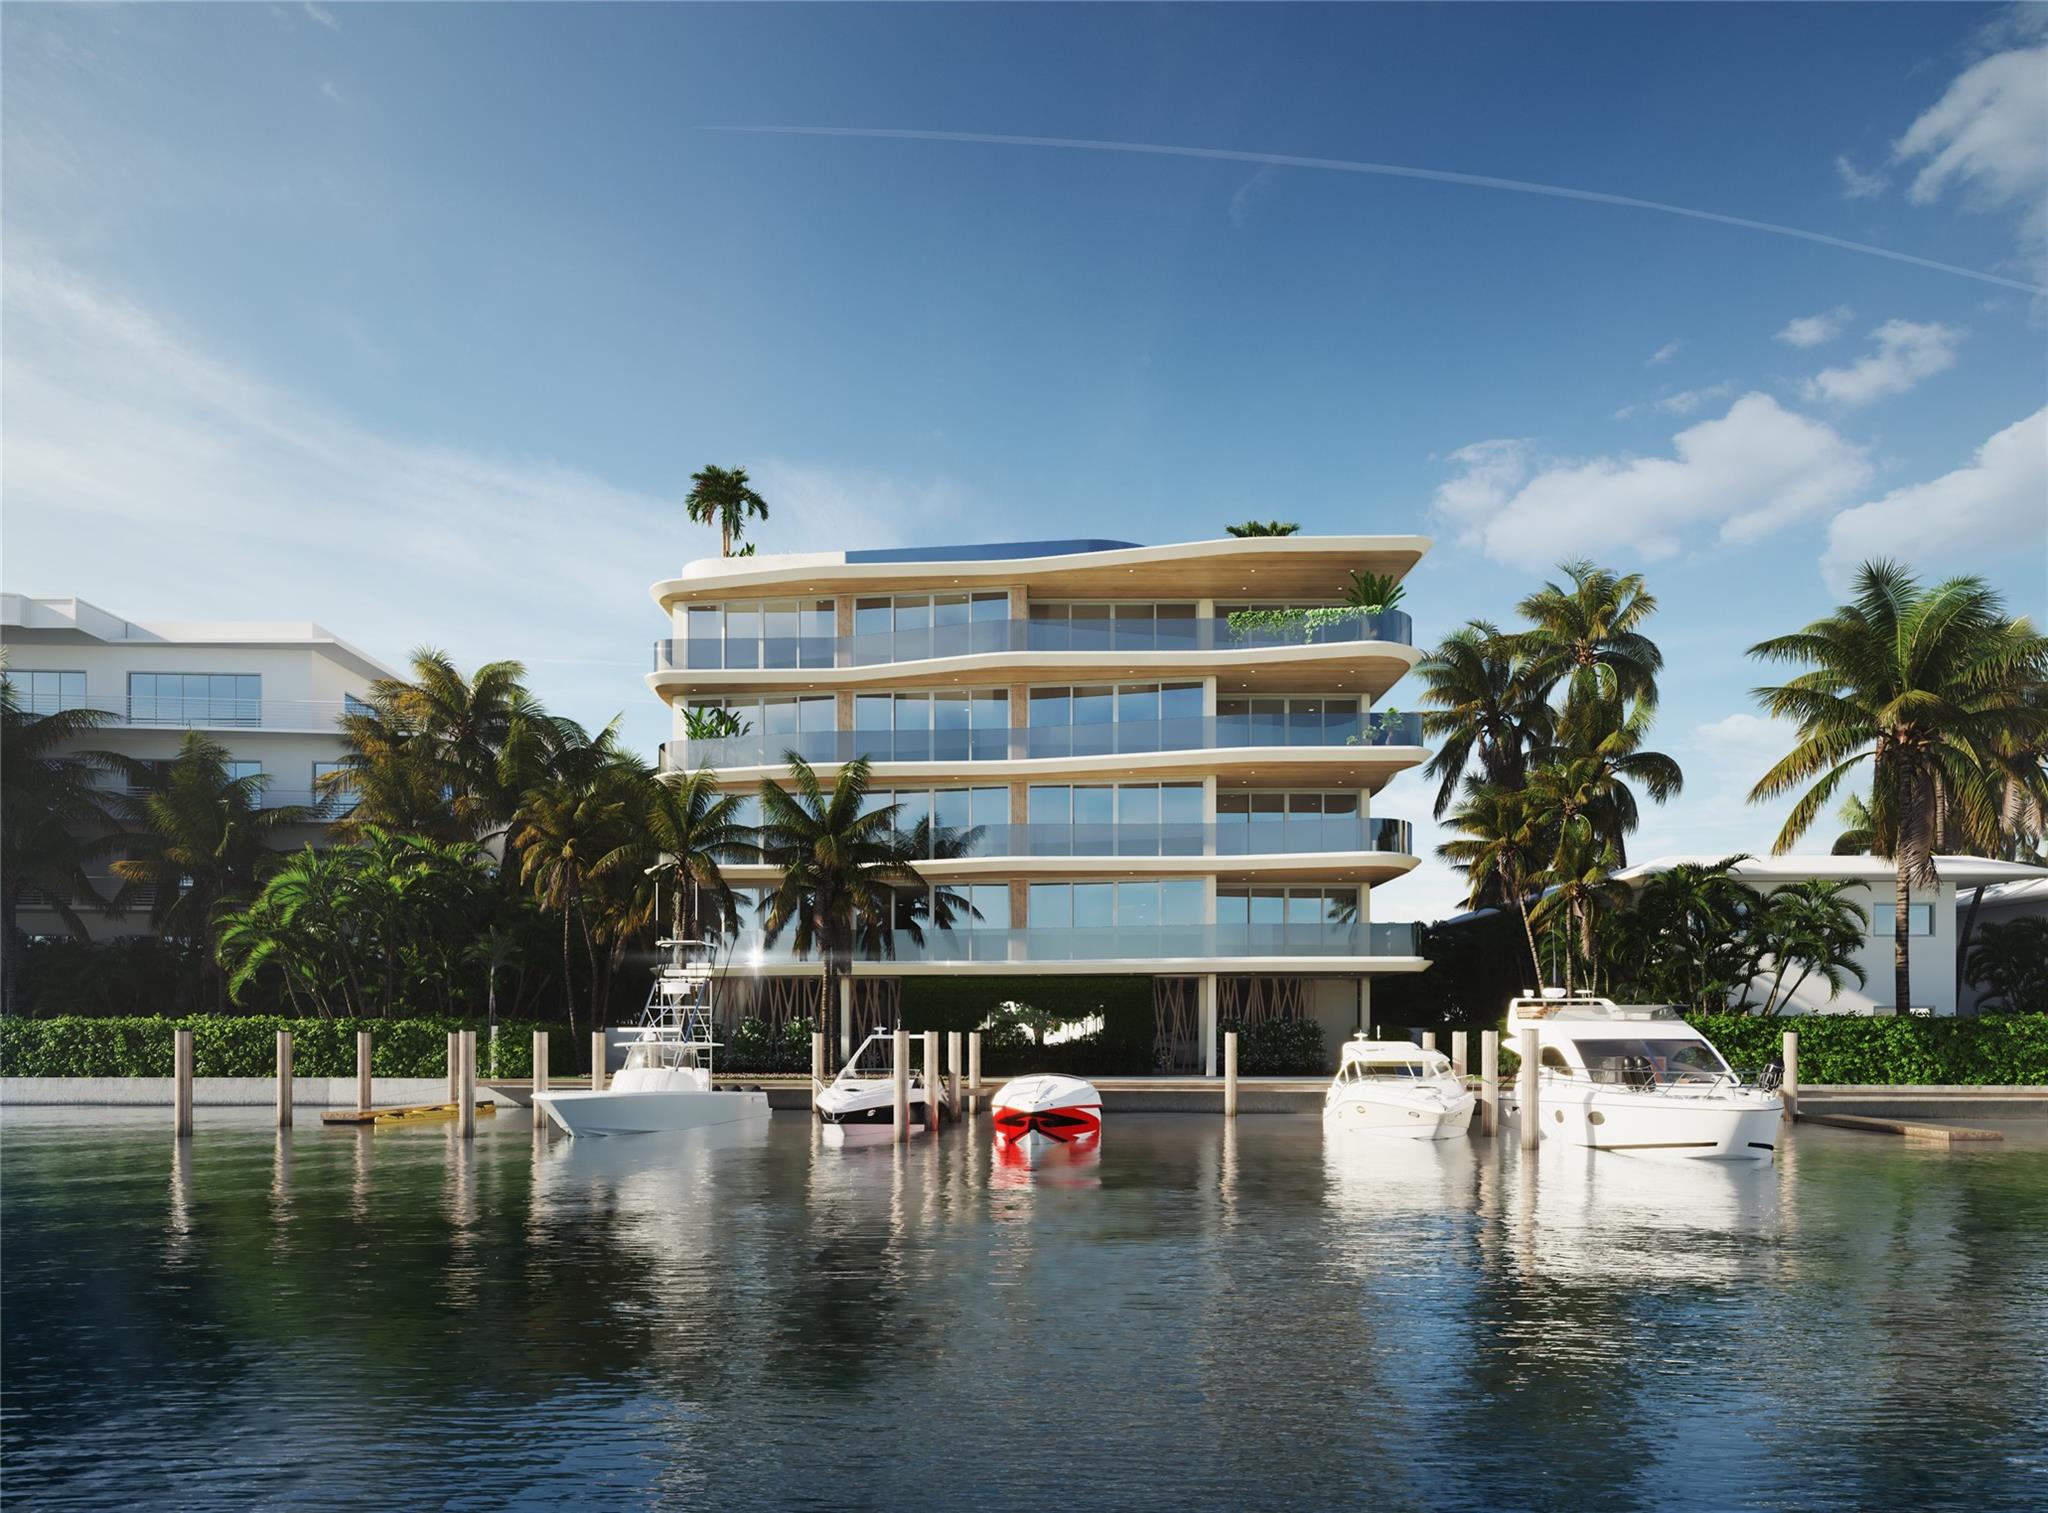 Lumiere, Fort Lauderdale's newest intimate waterfront enclave consisting of 7 luxury units each with private dockage & no fixed bridges to the Intracoastal & Ocean. Embrace a new level of modern architecture & luxury with spacious flow through open floor plans, volume ceilings & luminous spaces enhanced by floor to ceiling walls of glass with expansive waterway views. Epicurean kitchens outfitted with European cabinetry, state-of-the-art appliances, gas cooktops, wine storage units & walk-in pantries. Resort inspired lifestyle by the waterside pool, rooftop terrace & fitness center. Elevated living with smart technology, EV charging, dedicated storage units & Luxor package storage units with refrigerated compartments. Minutes to restaurants, shopping & the beach. Sq. ft. from developer.